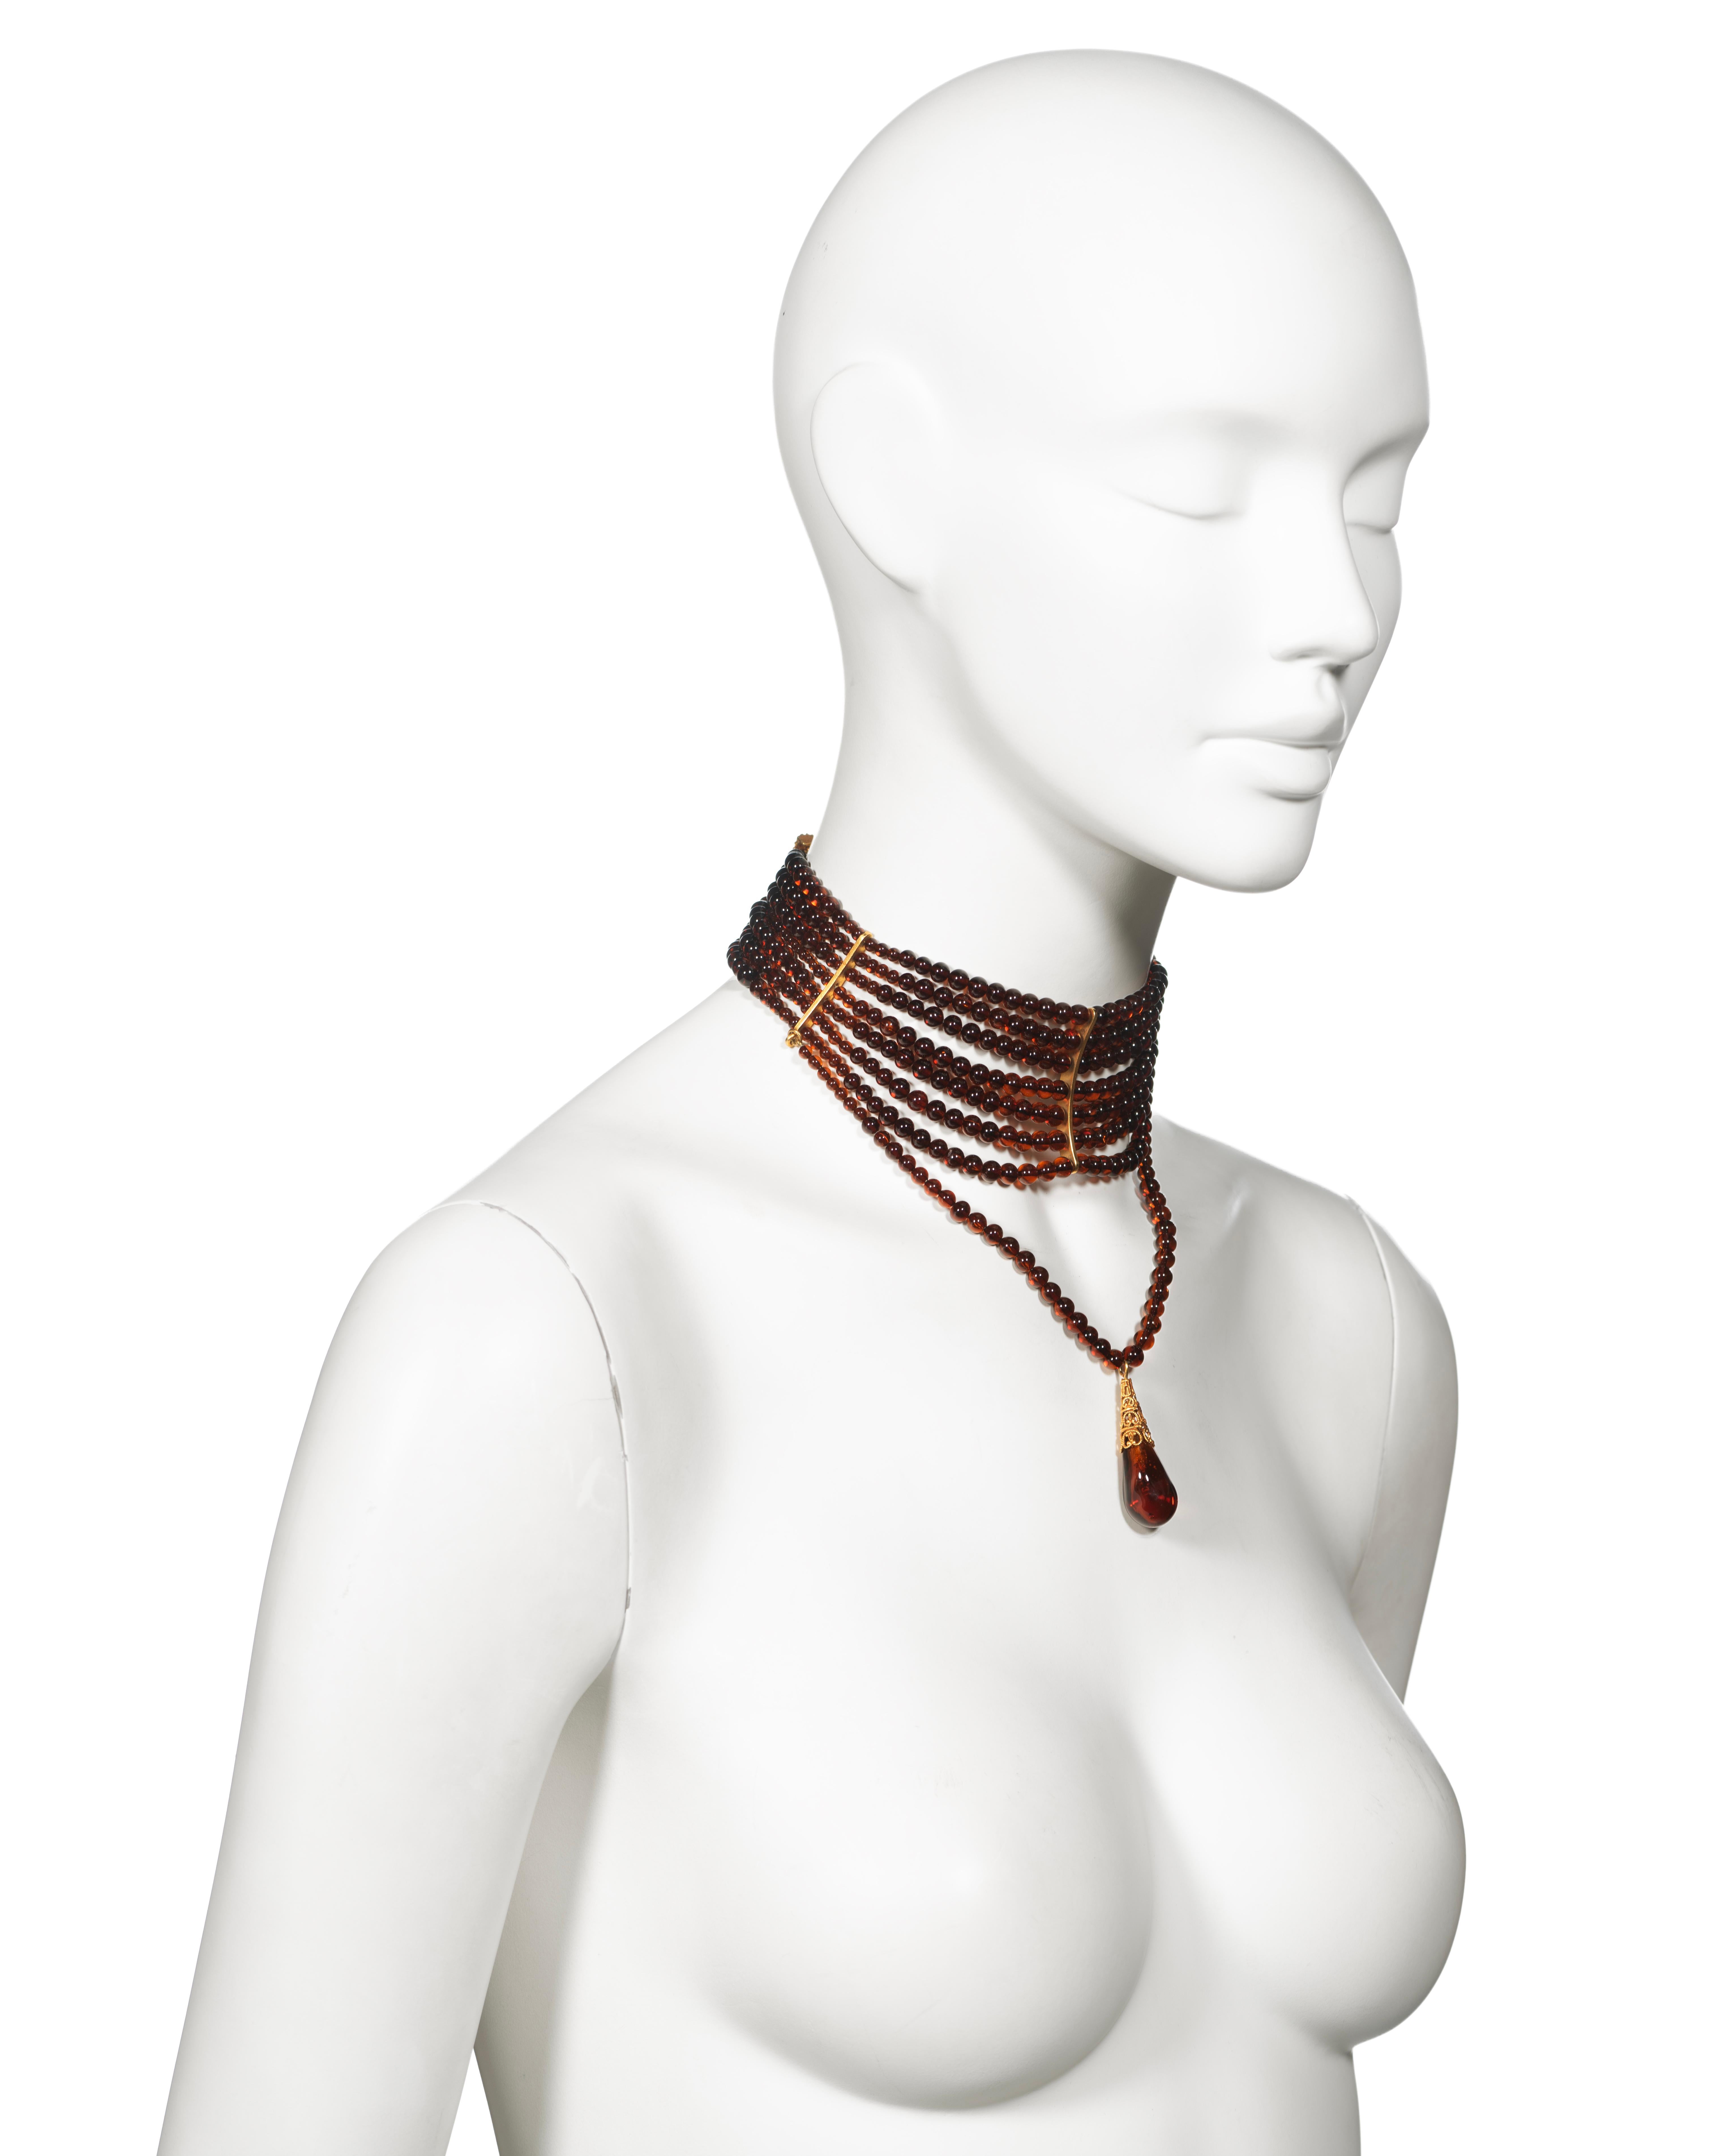 Women's Christian Dior by John Galliano Amber Glass Bead Choker Necklace, c. 1998 For Sale